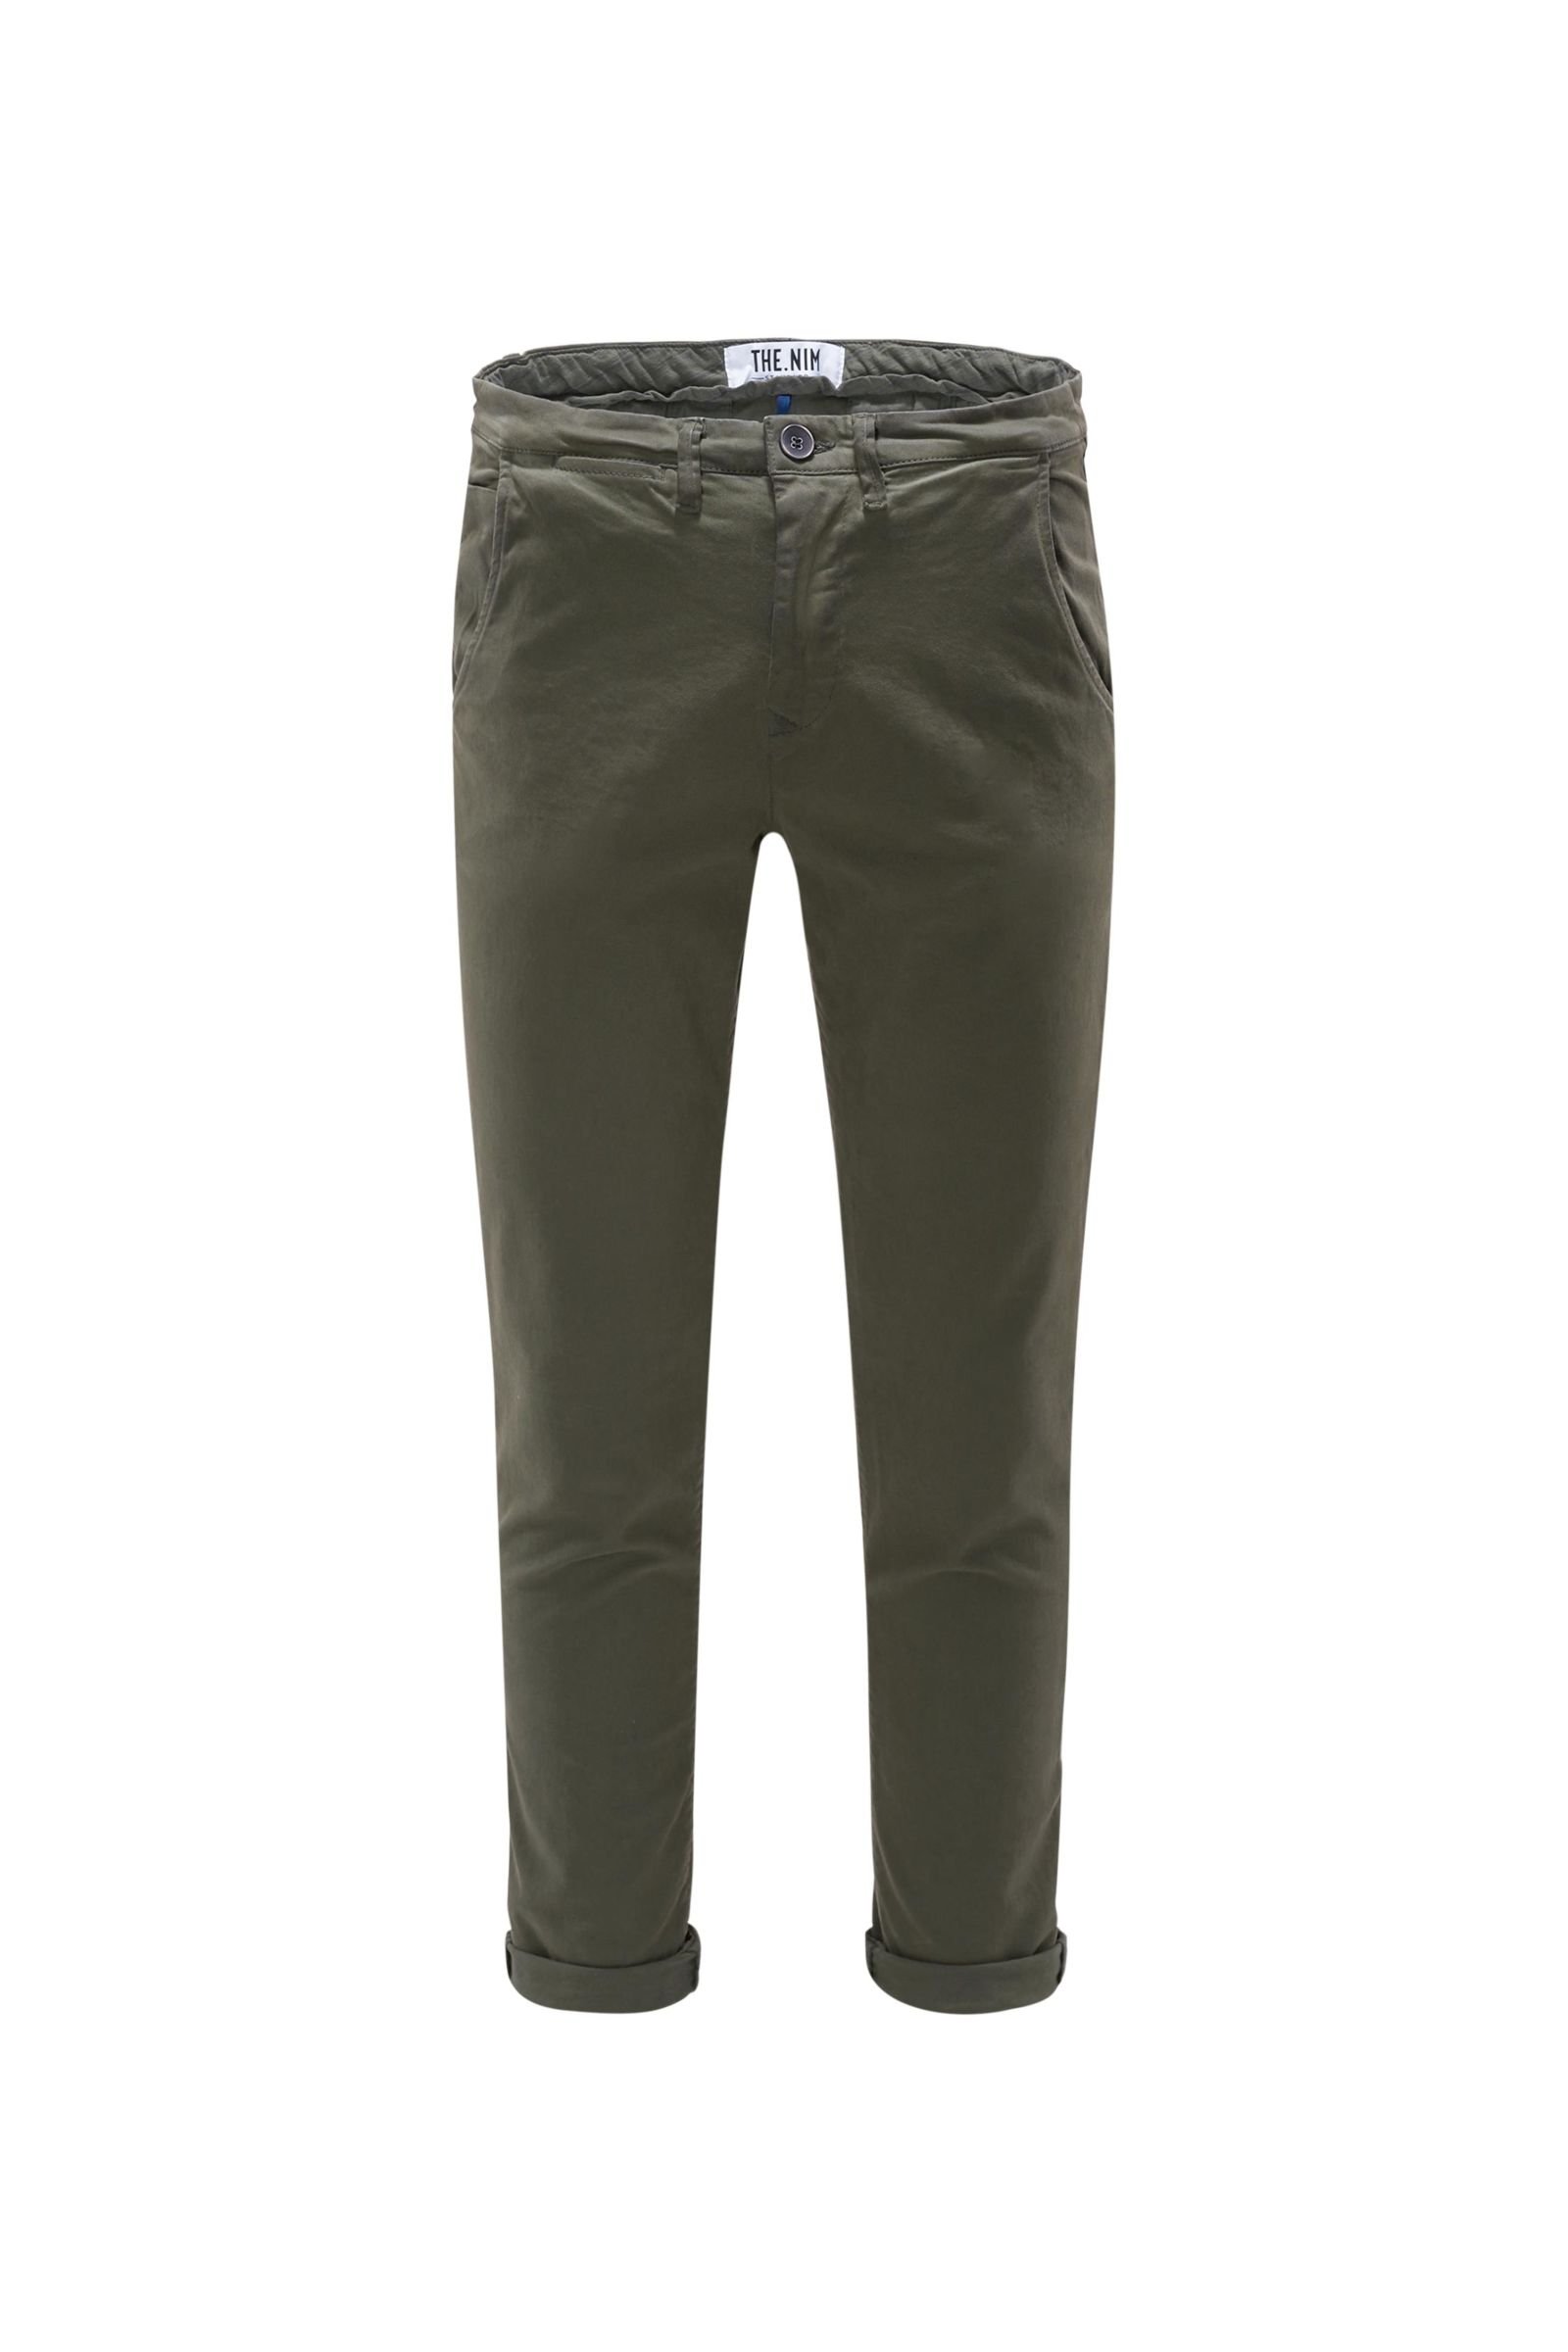 Cotton trousers olive